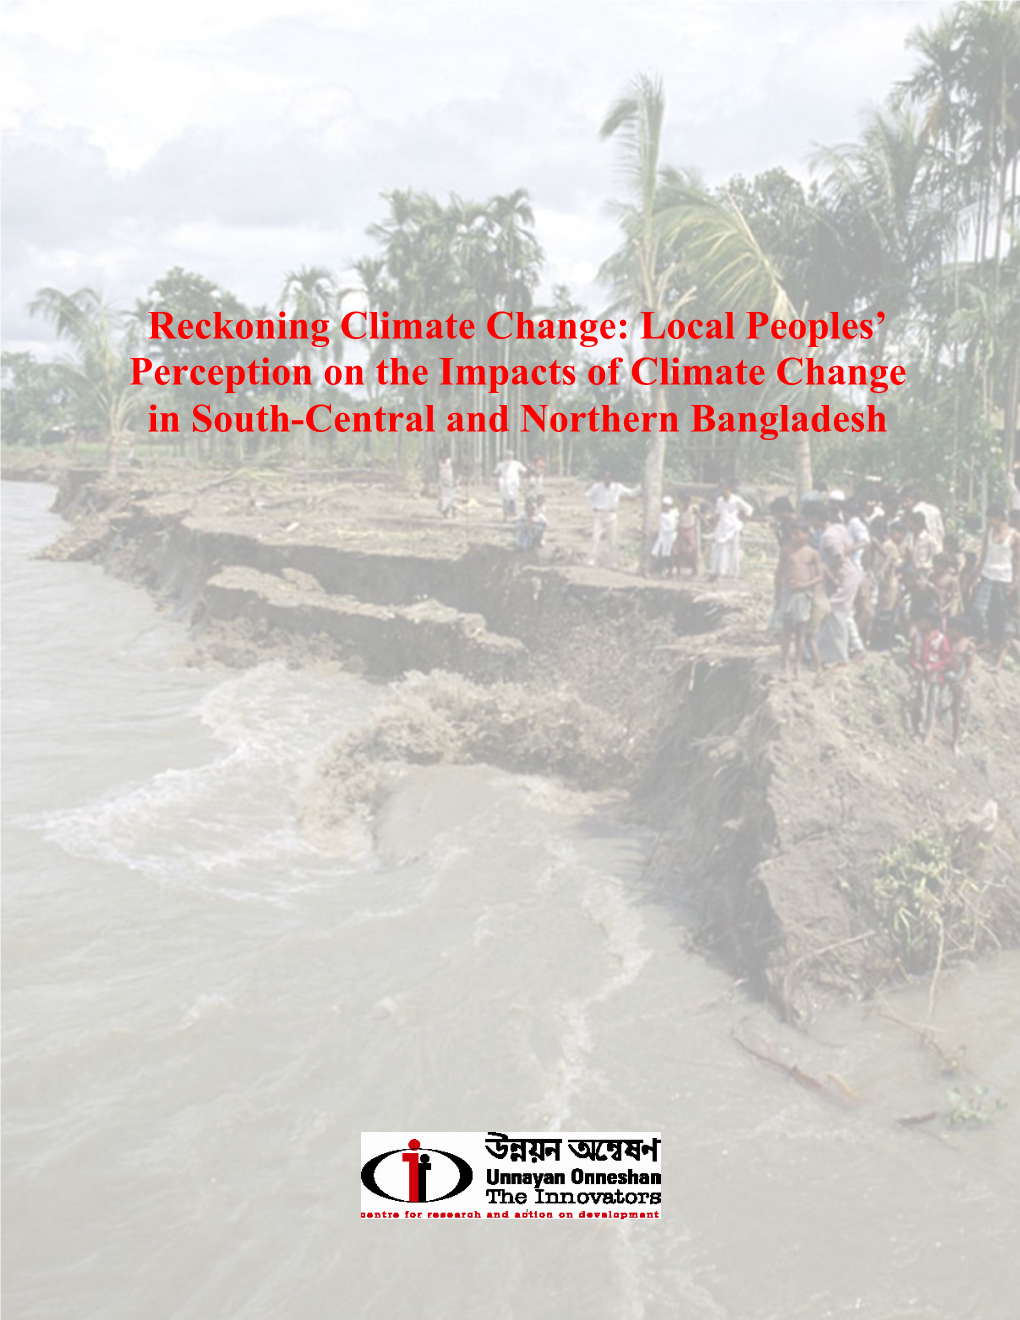 Reckoning Climate Change: Local Peoples’ Perception on the Impacts of Climate Change in South-Central and Northern Bangladesh